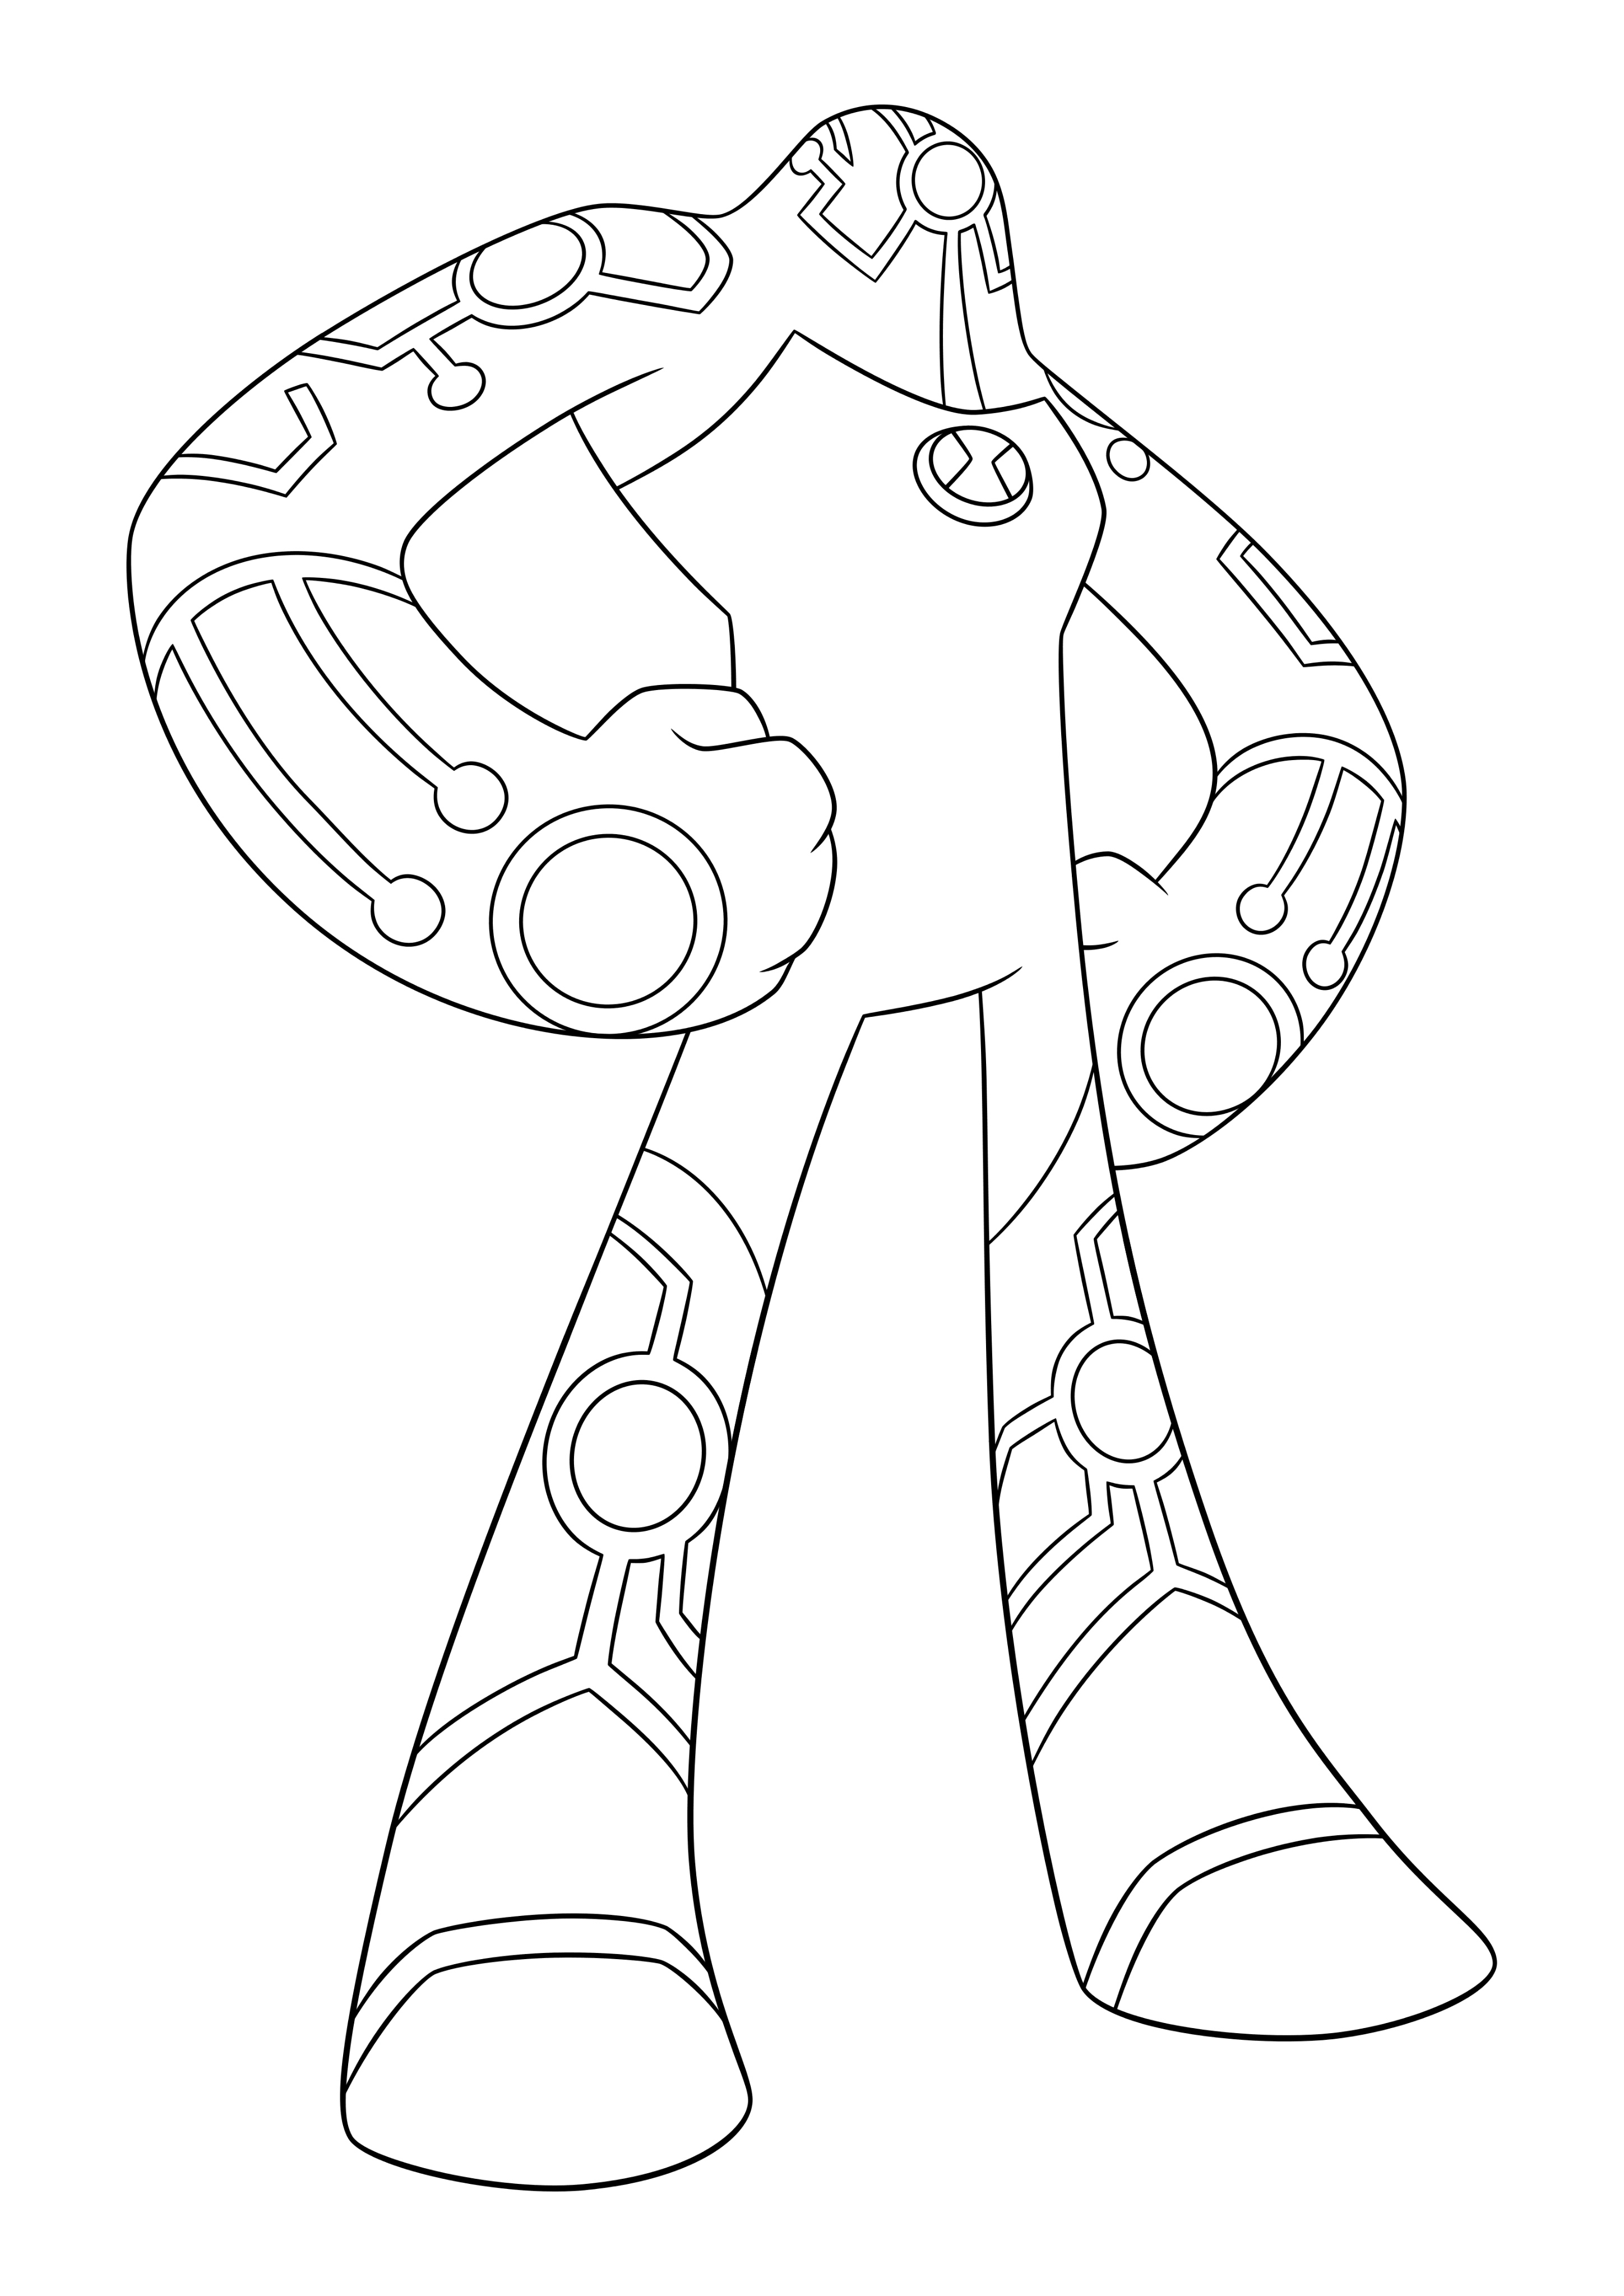 Print Ben 10 Coloring Pages for free.